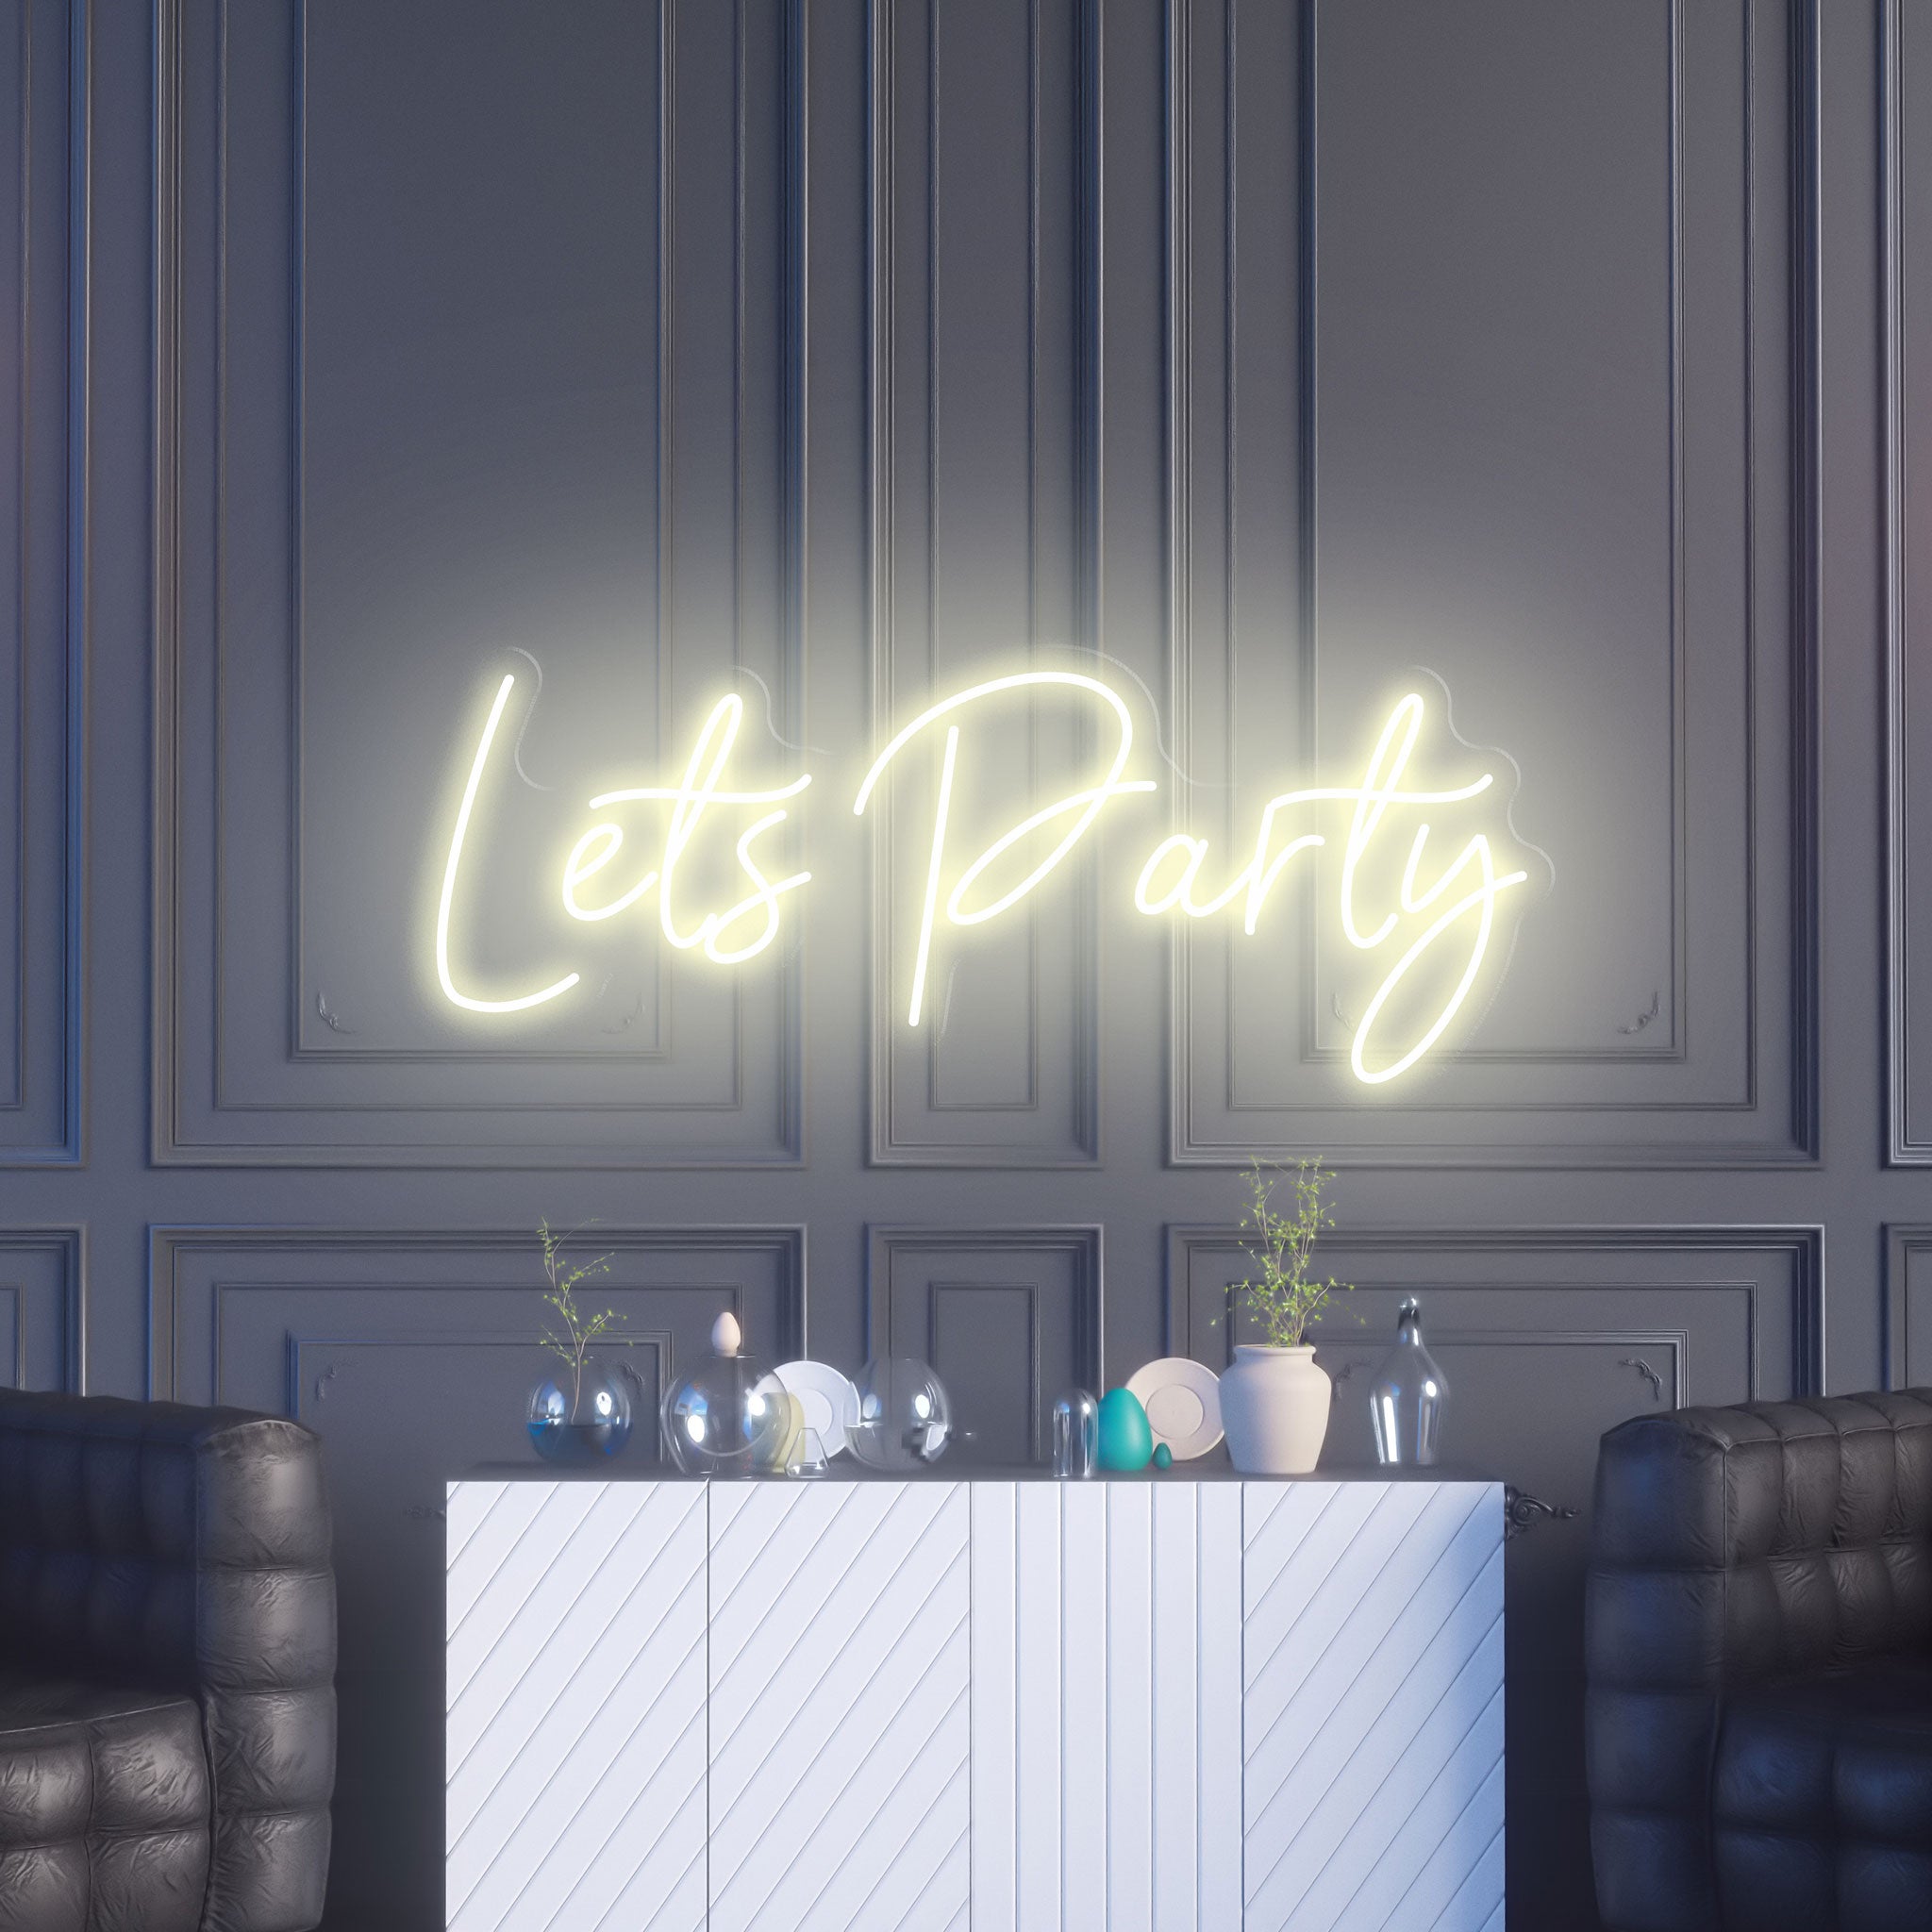 Lets Party - Neon Sign - Bar/Club/Party Celebration Event